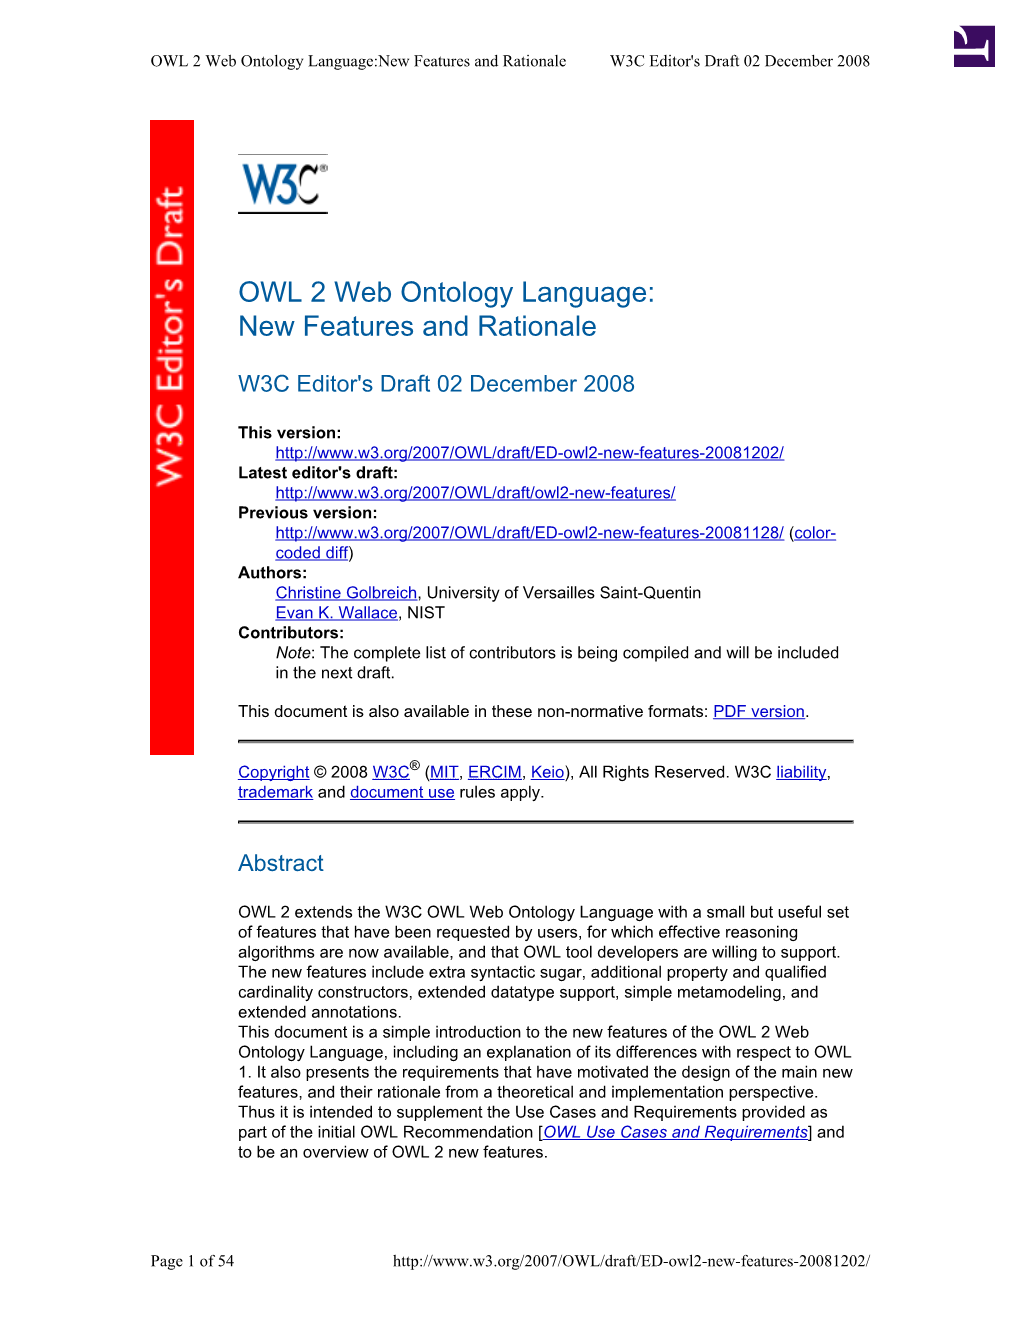 OWL 2 Web Ontology Language:New Features and Rationale W3C Editor's Draft 02 December 2008